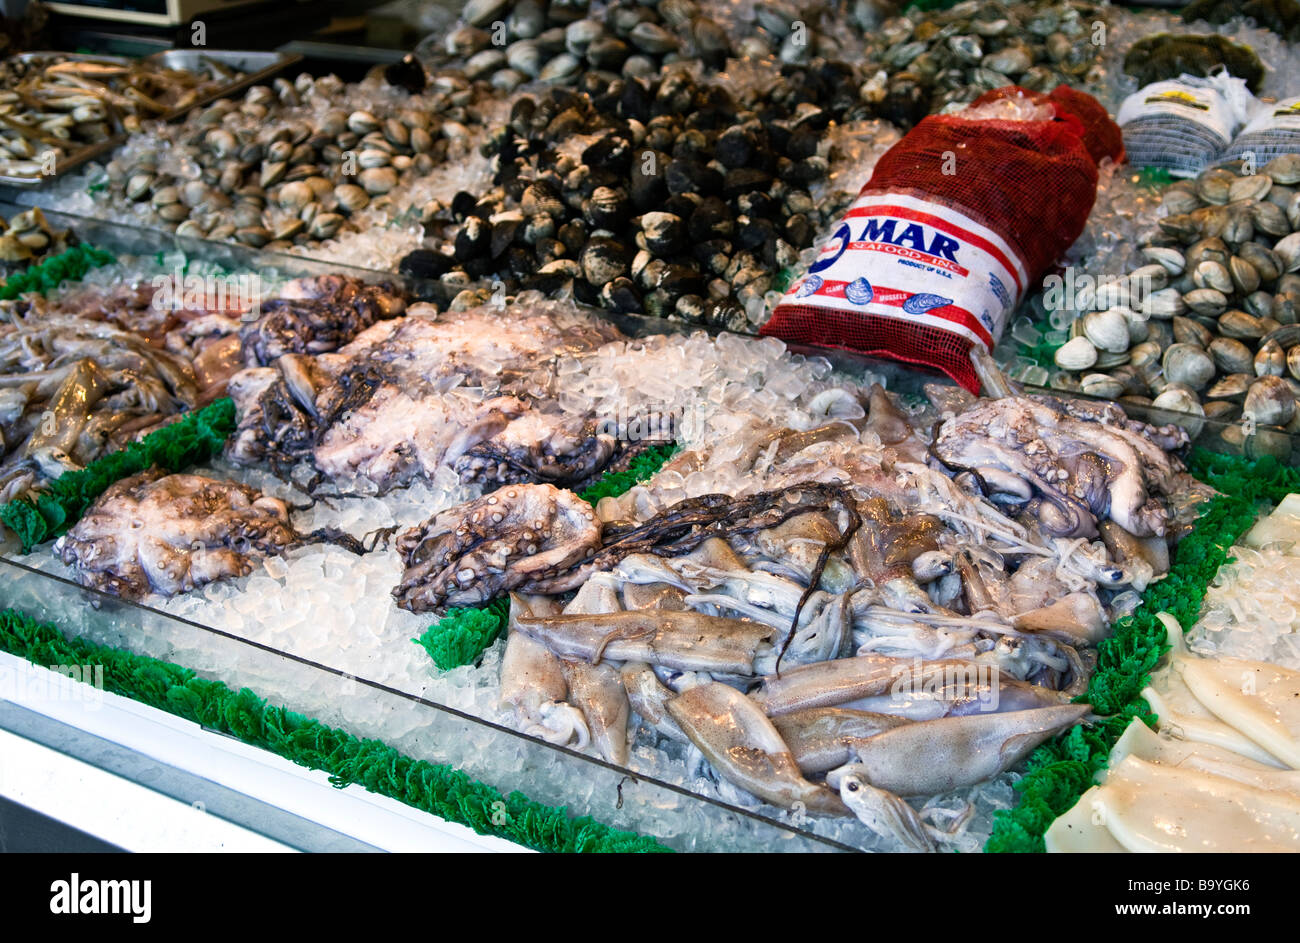 Squid, Octopus and clams displayed for purchase at the Wharf, a waterfront seafood vendor Stock Photo